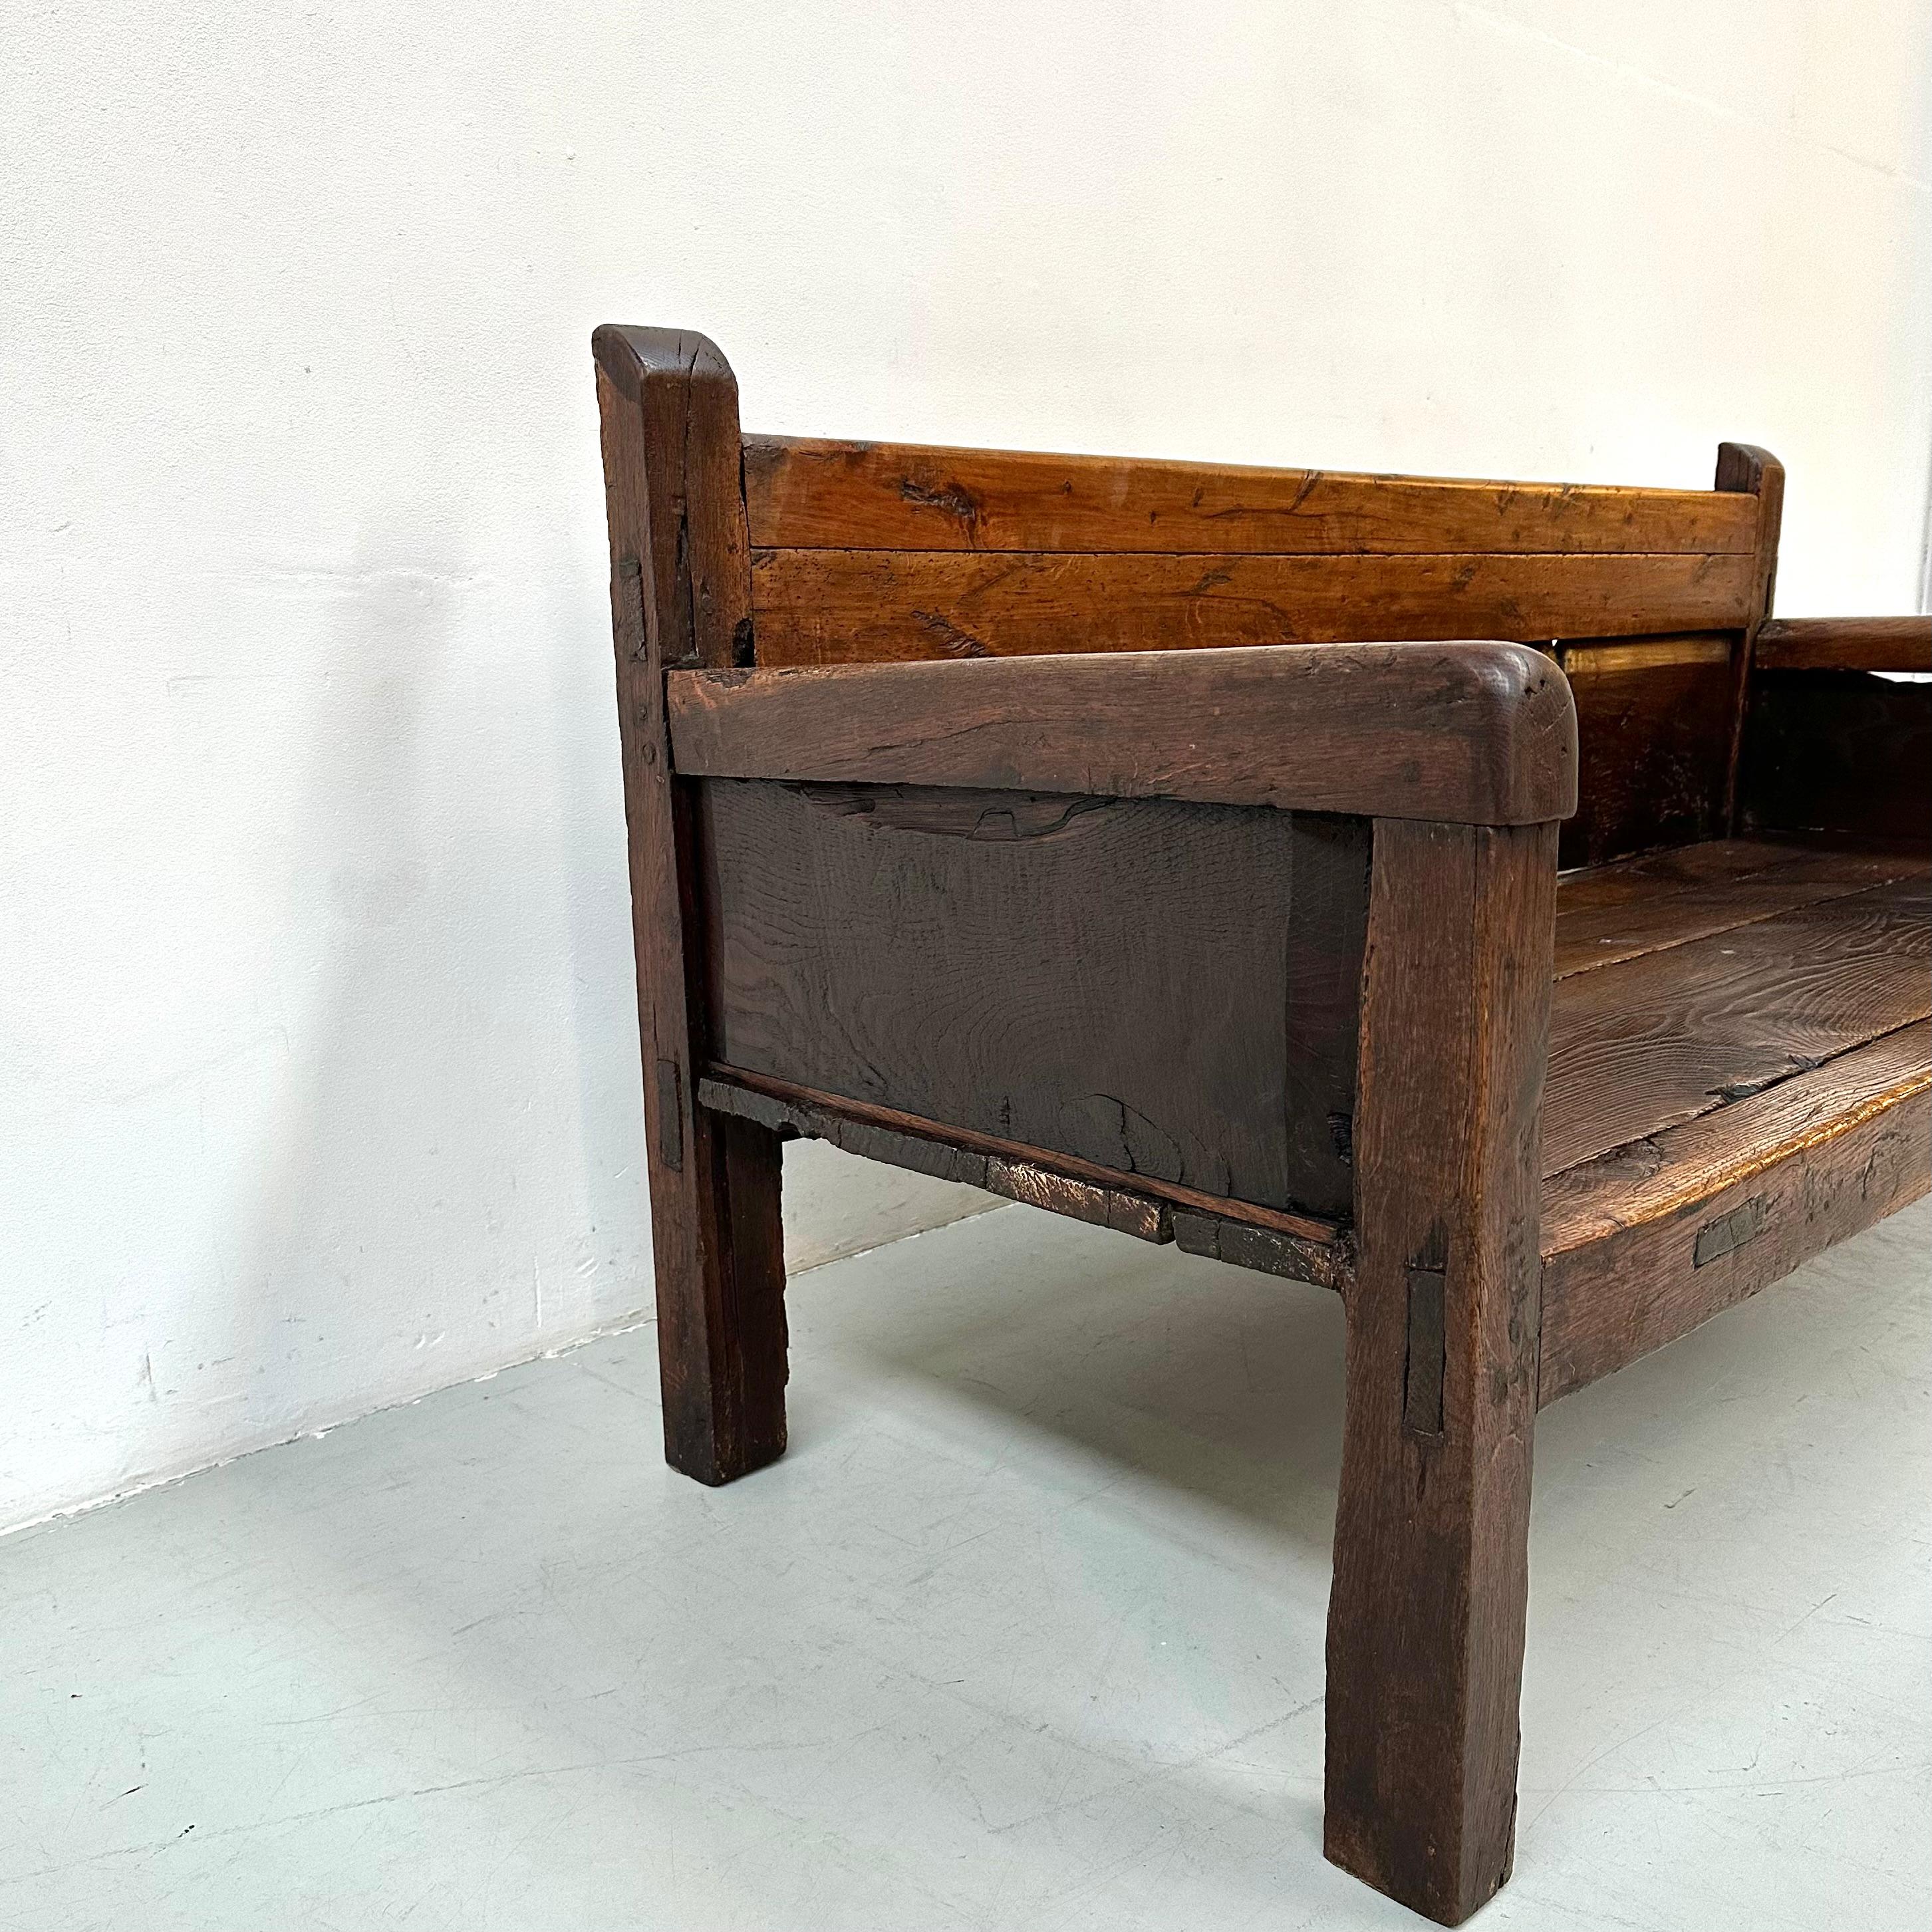 Antique Handmade Minimalistic Spanish Chestnut Wood Bench, Early 19th Century For Sale 4